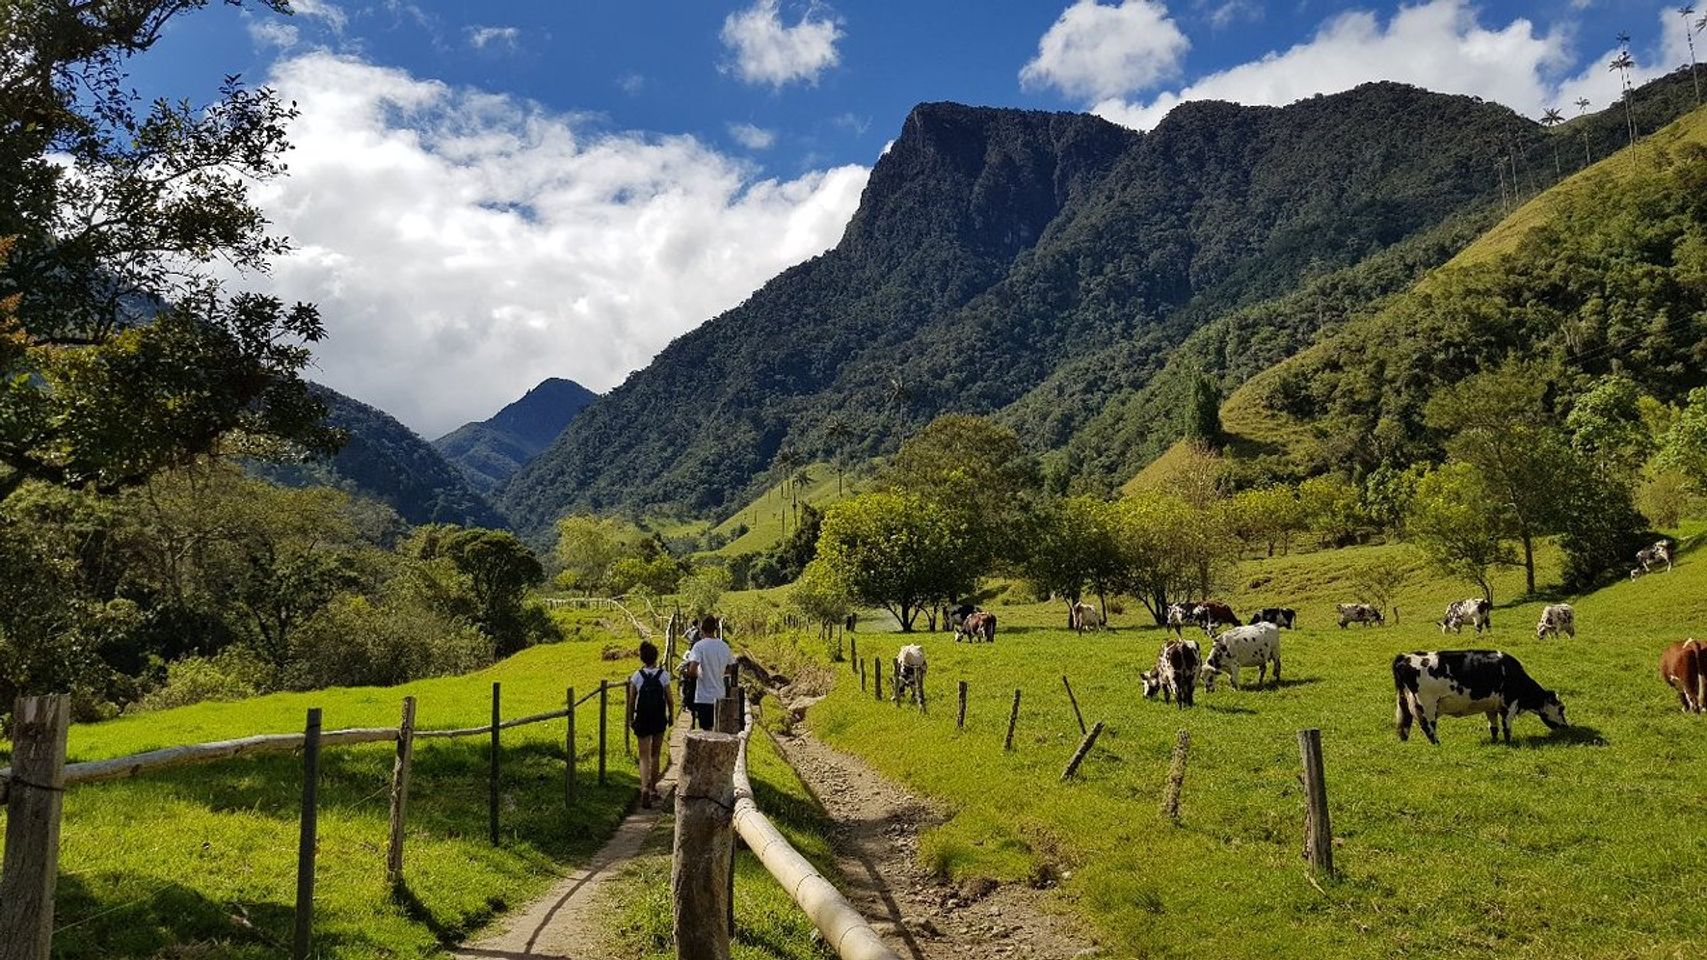 Visiting the Valle de Cocora